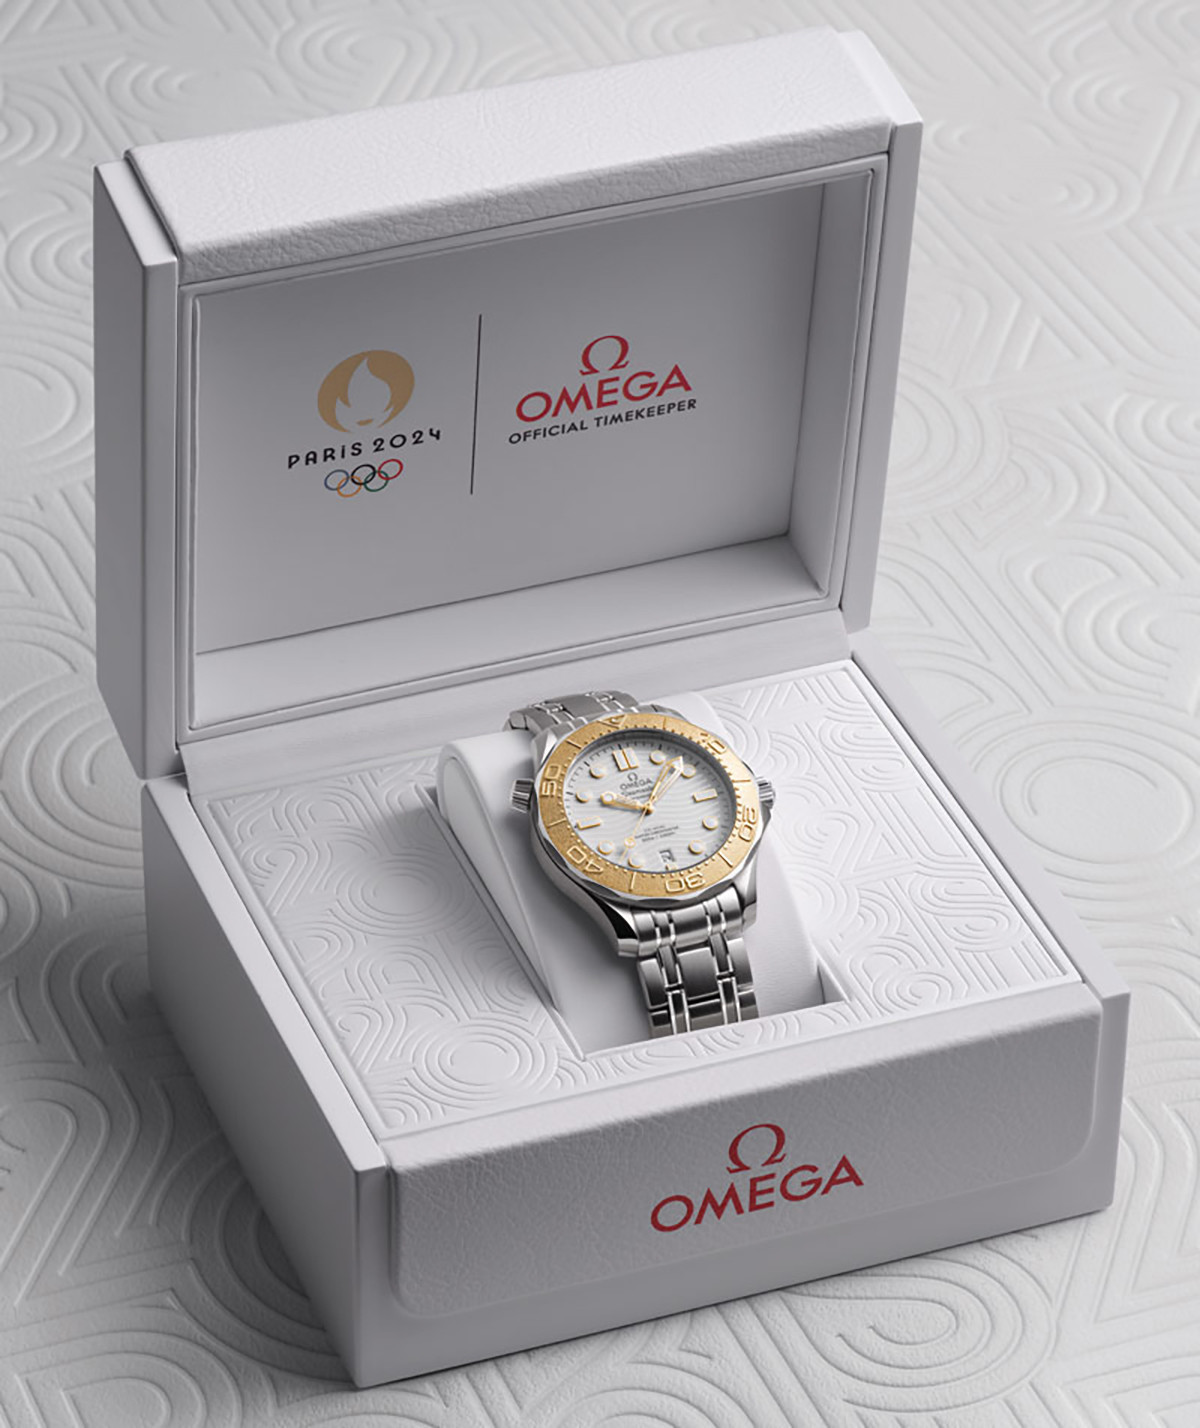 Omega has released a limited edition watch for Paris 2024 ©Omega